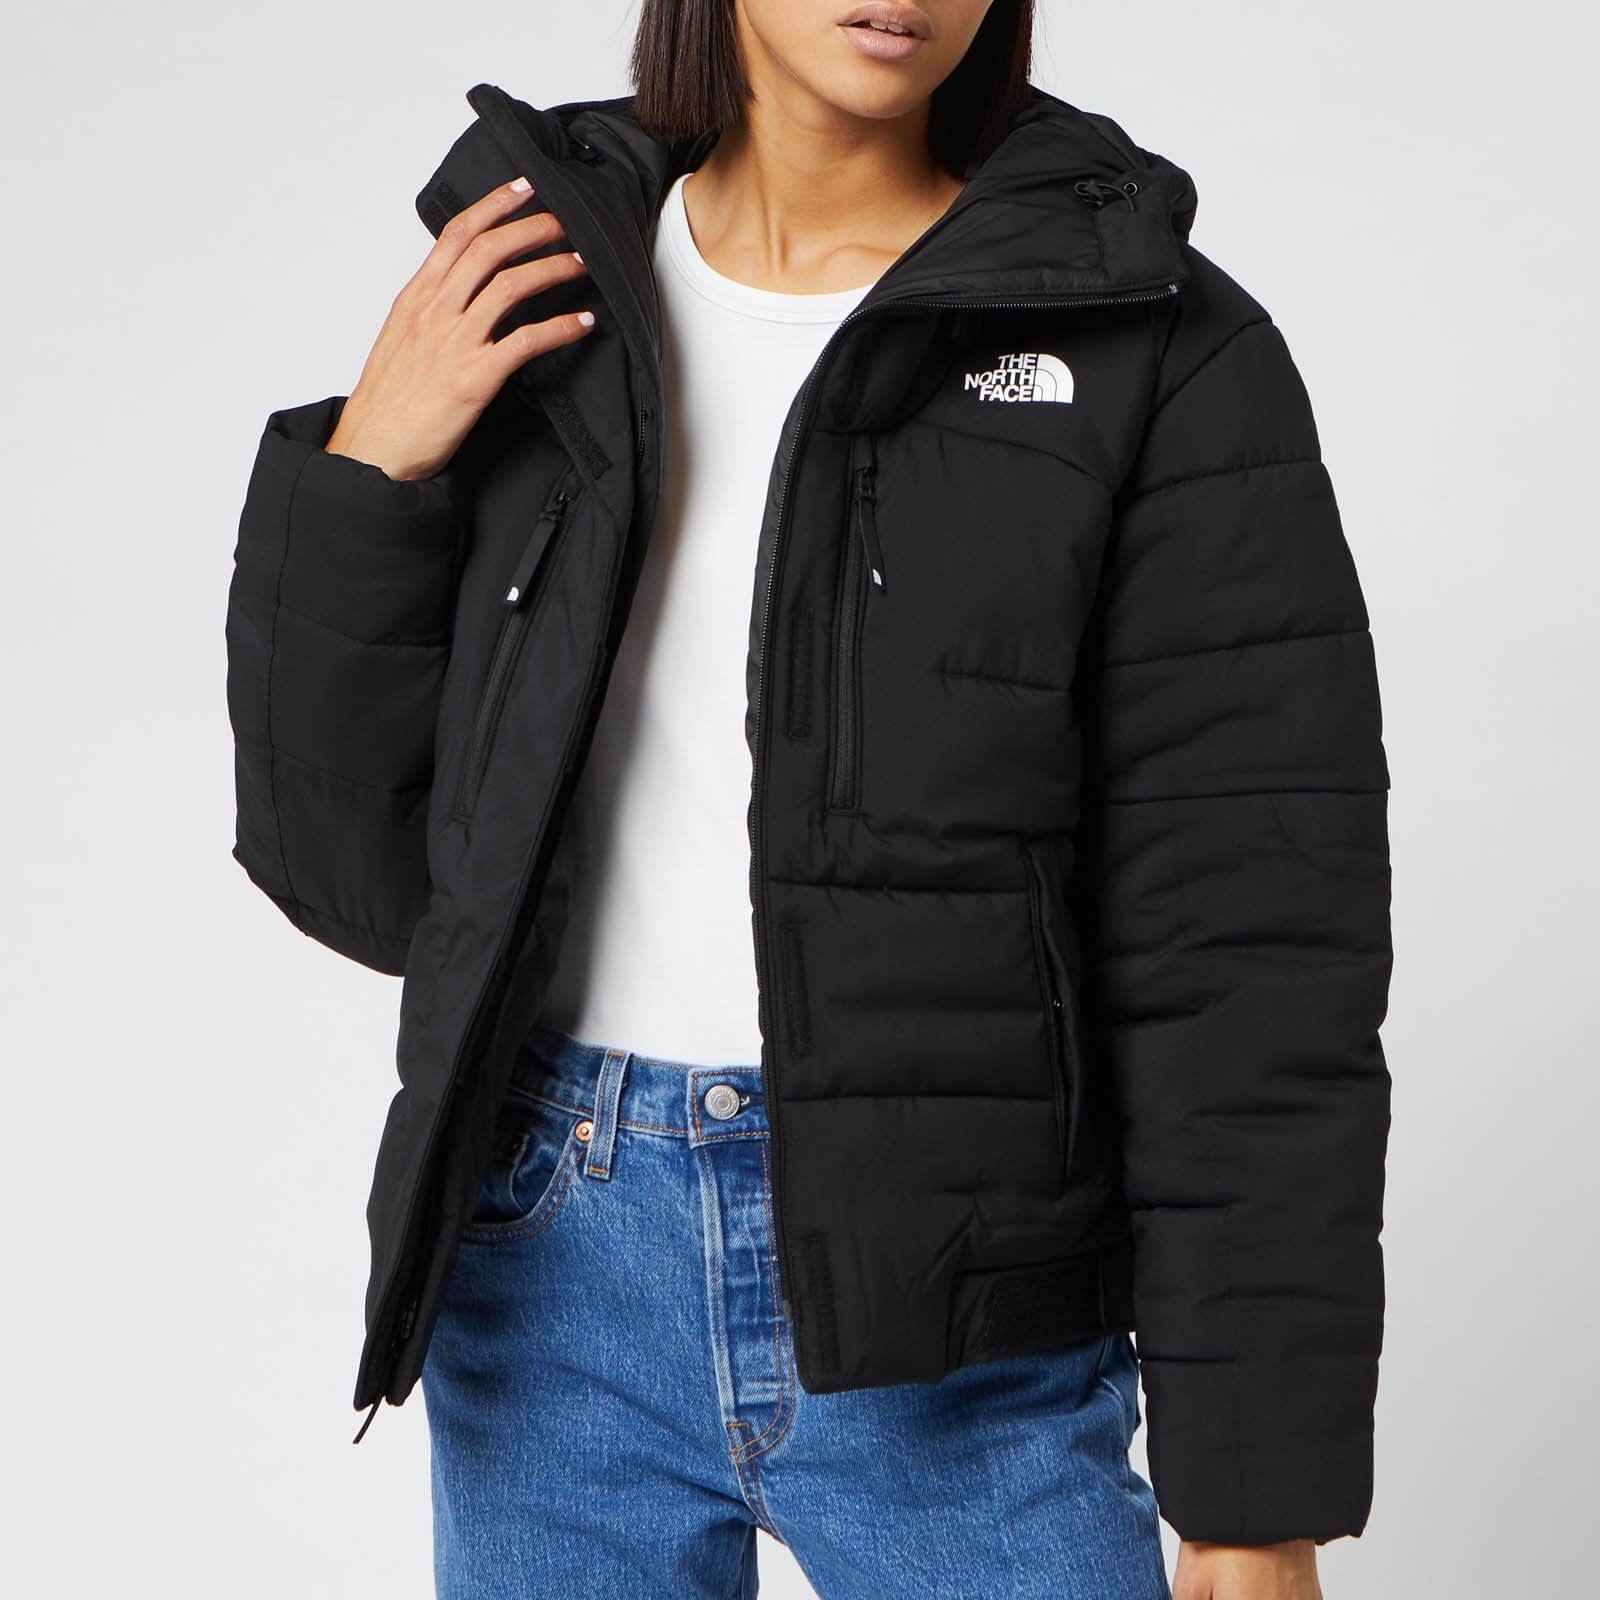 north face black jacket puffer